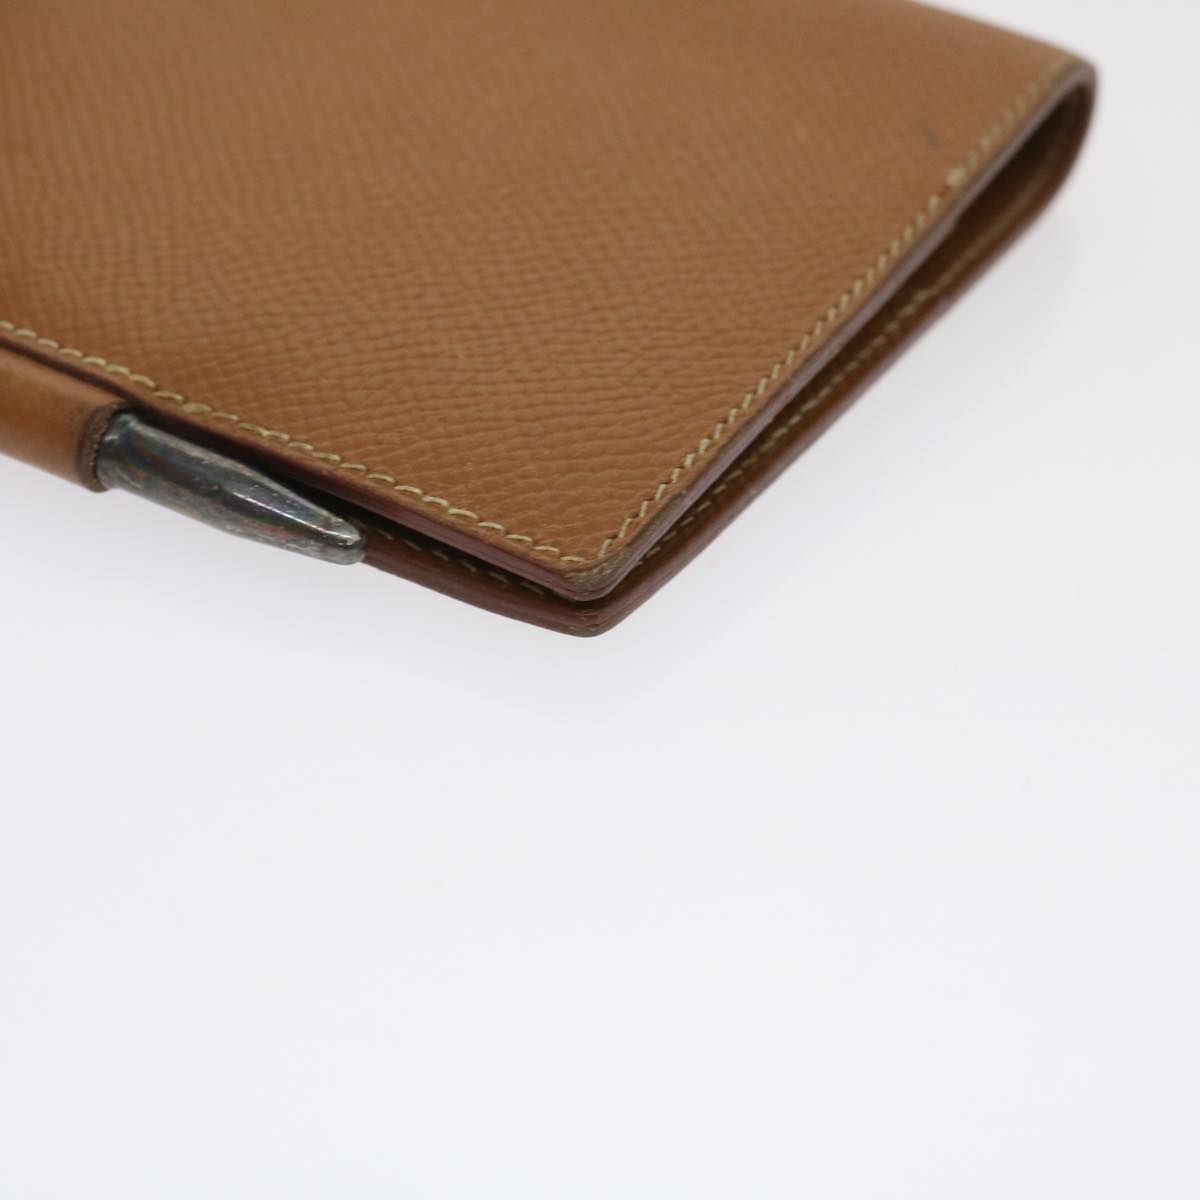 HERMES Day Planner Cover Leather Brown Auth th2596